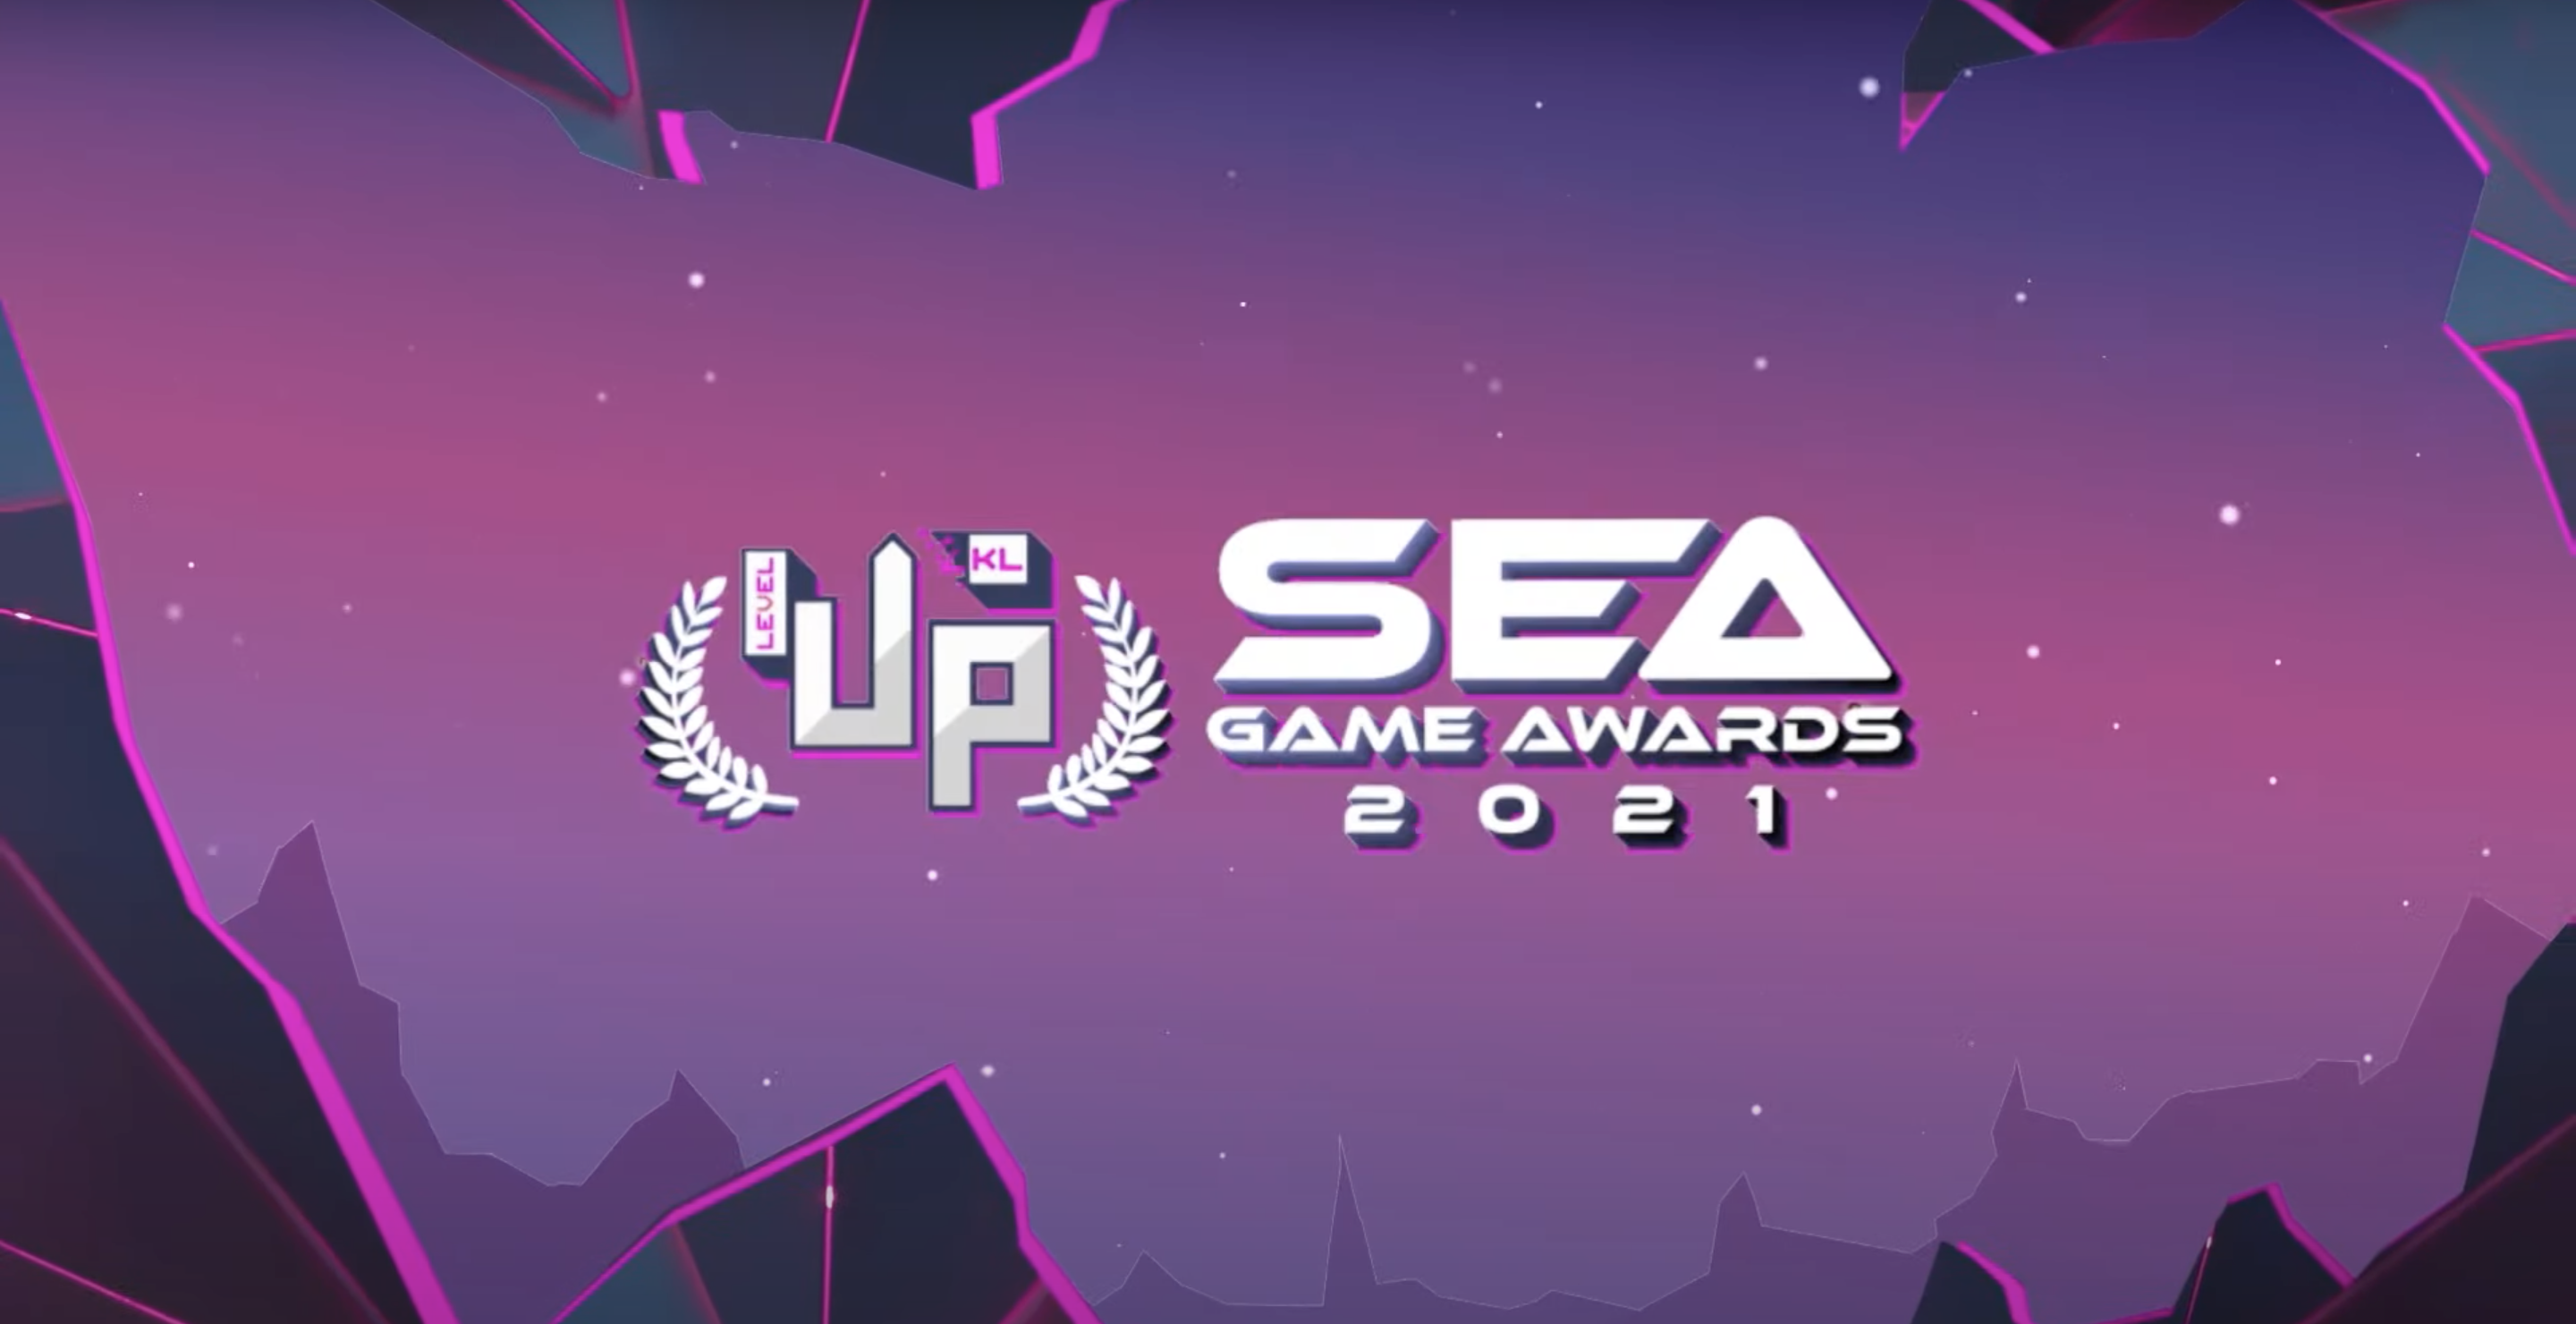 Who Will Be The Next Rising Star in The SEA Game Awards 2021?